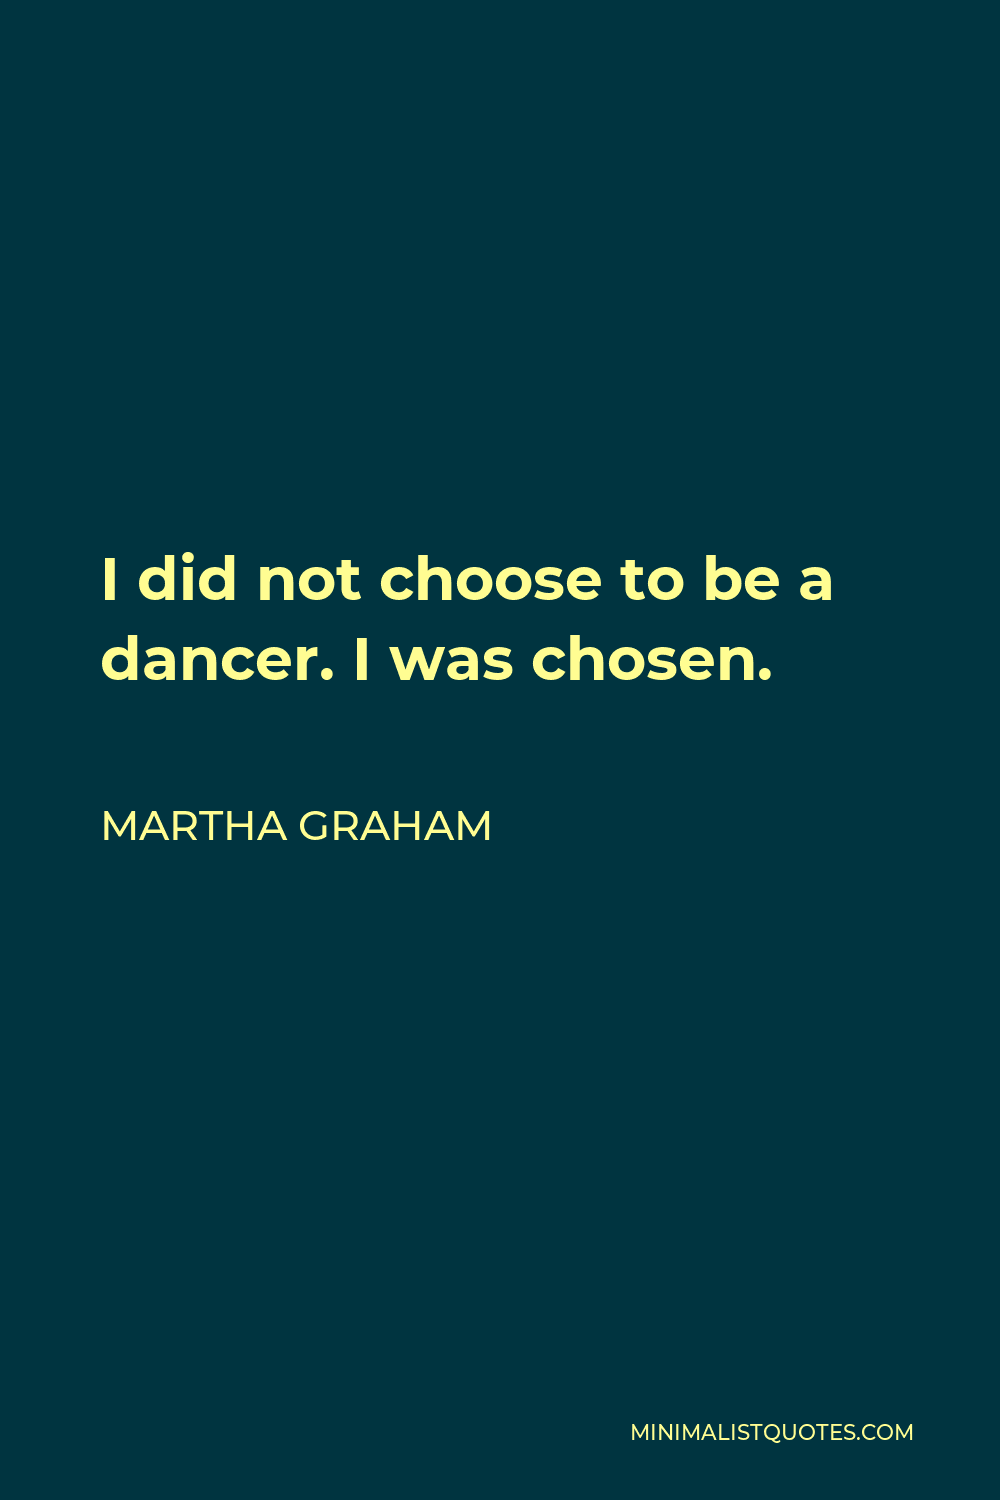 Martha Graham Quote - I did not choose to be a dancer. I was chosen.